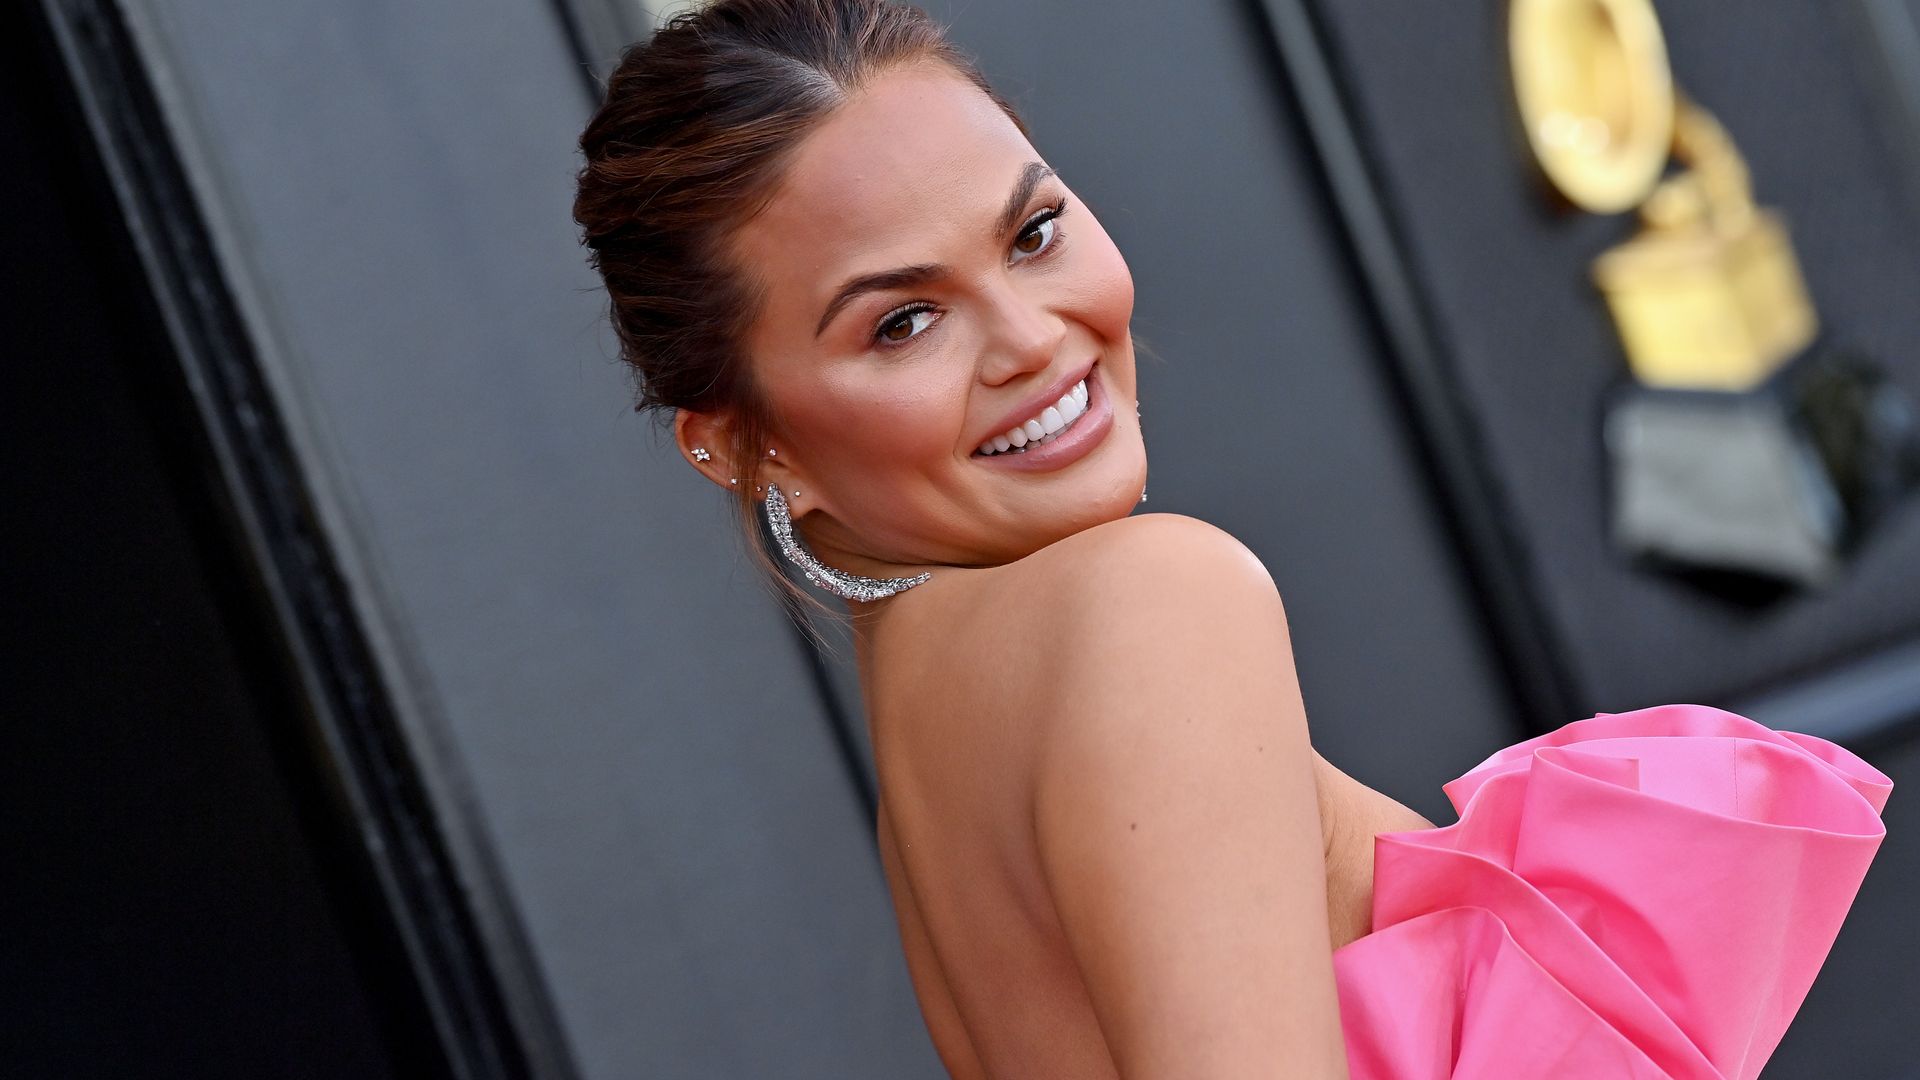 Chrissy Teigen's tearful confession about baby Esti - 'This happened today'